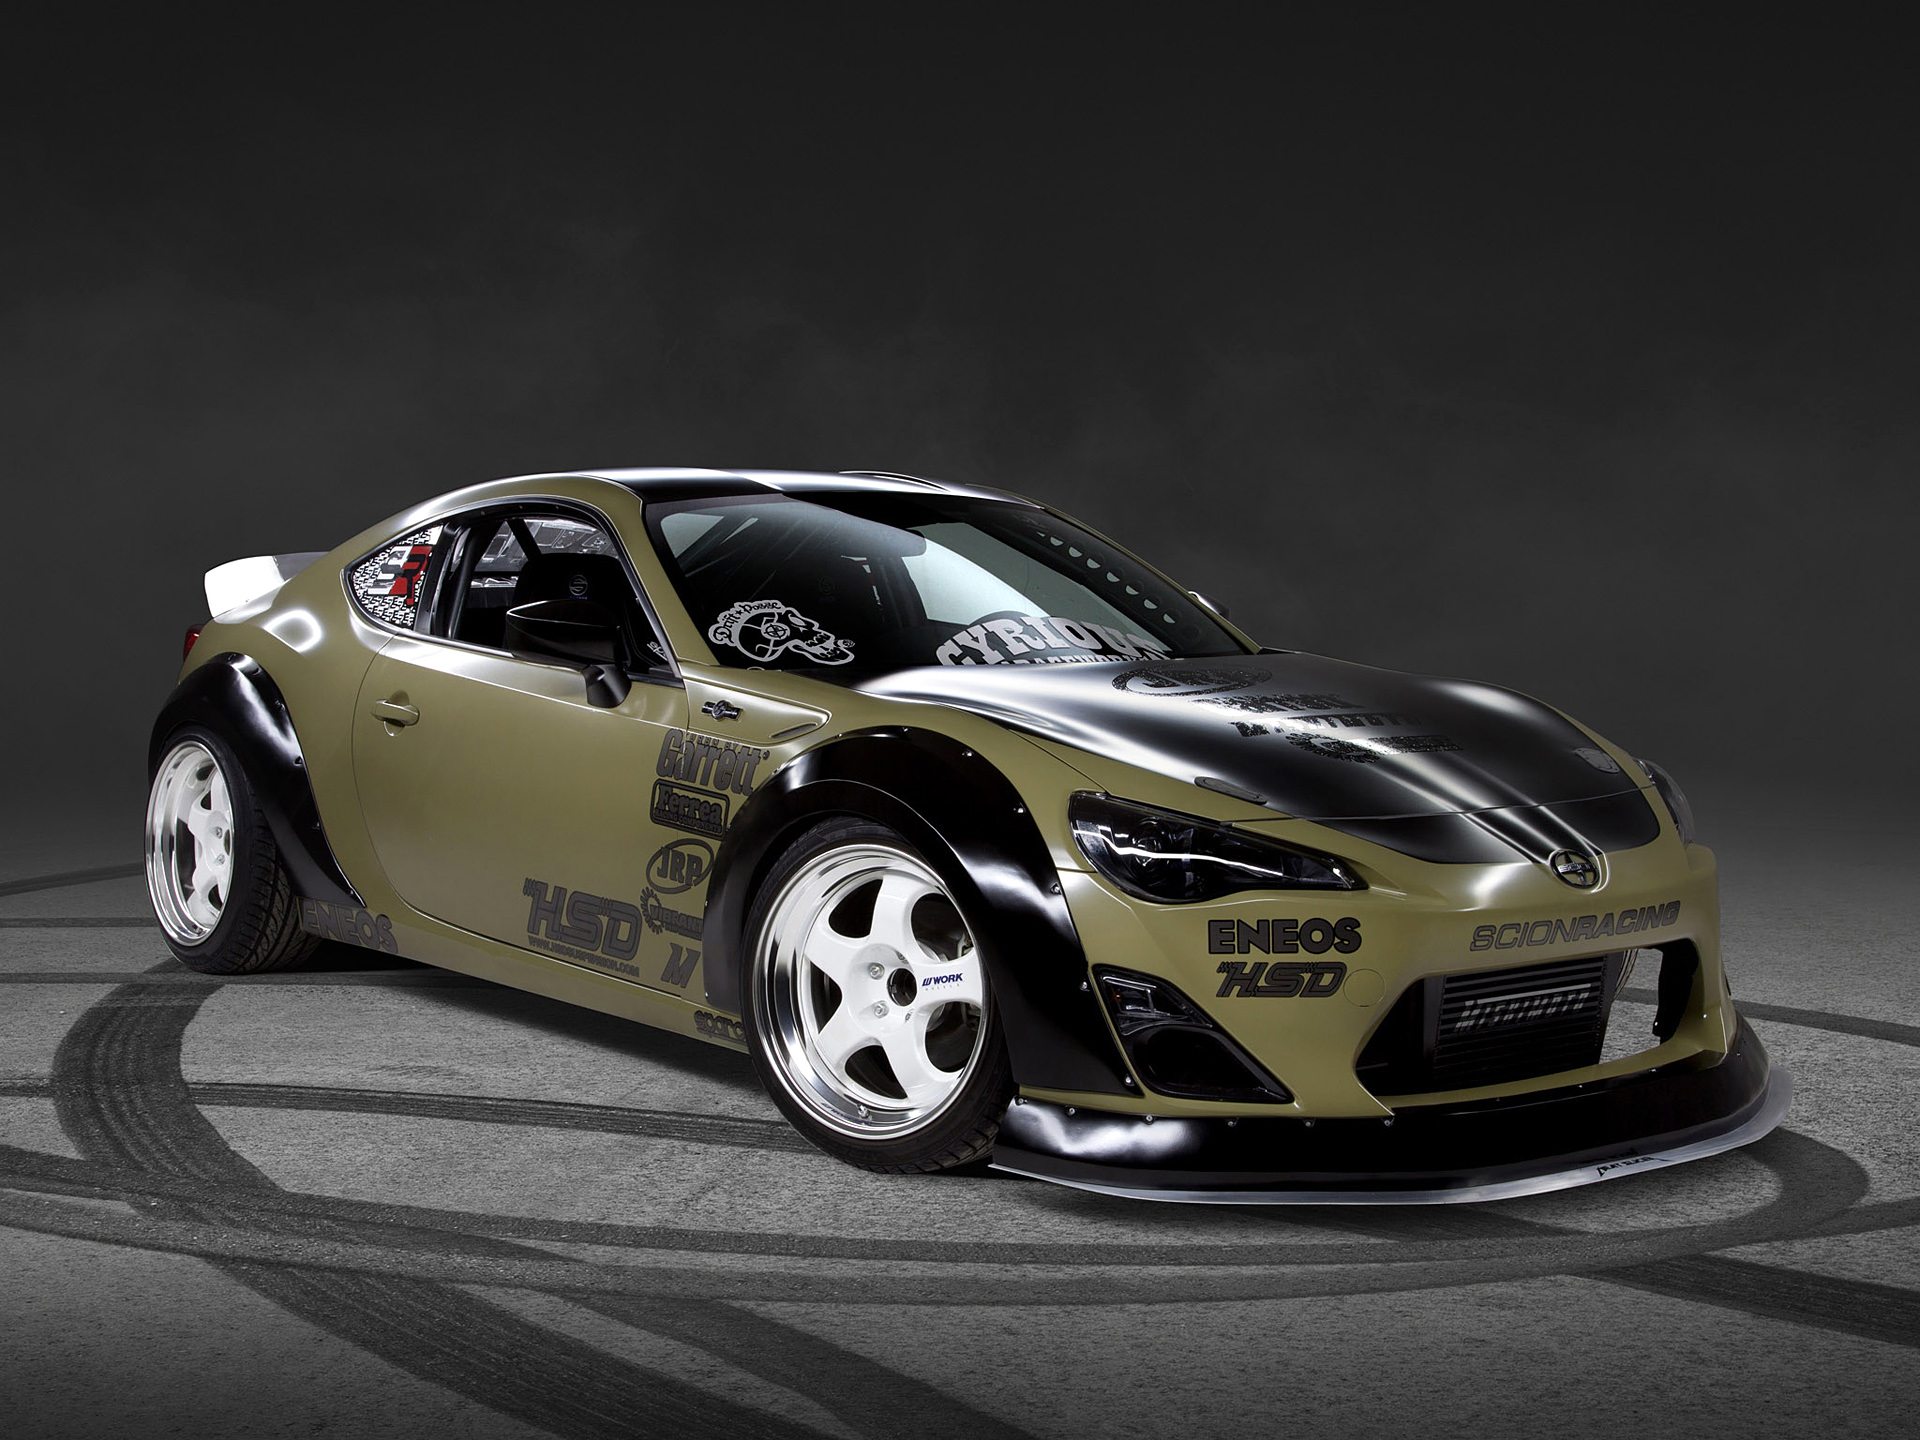  2013 Scion FR-S by Cyrious Garageworks Wallpaper.